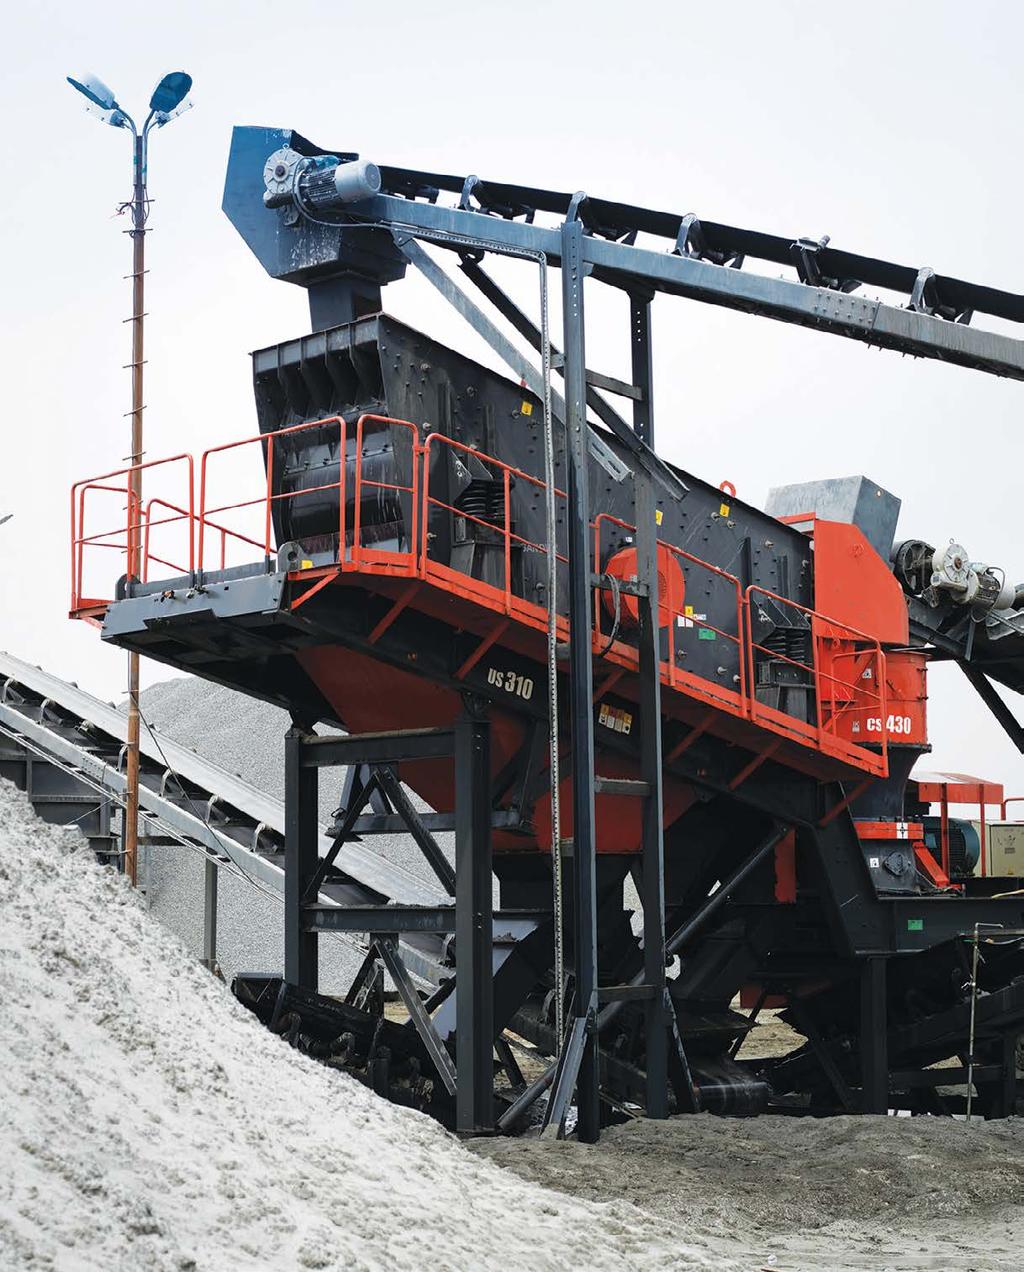 GYRATORY CONE CRUSHER GYRATORY CONE CRUSHER AND SCREENING UNIT Our wheeled range of gyratory cone crushers provides you with a highly productive and economical solution